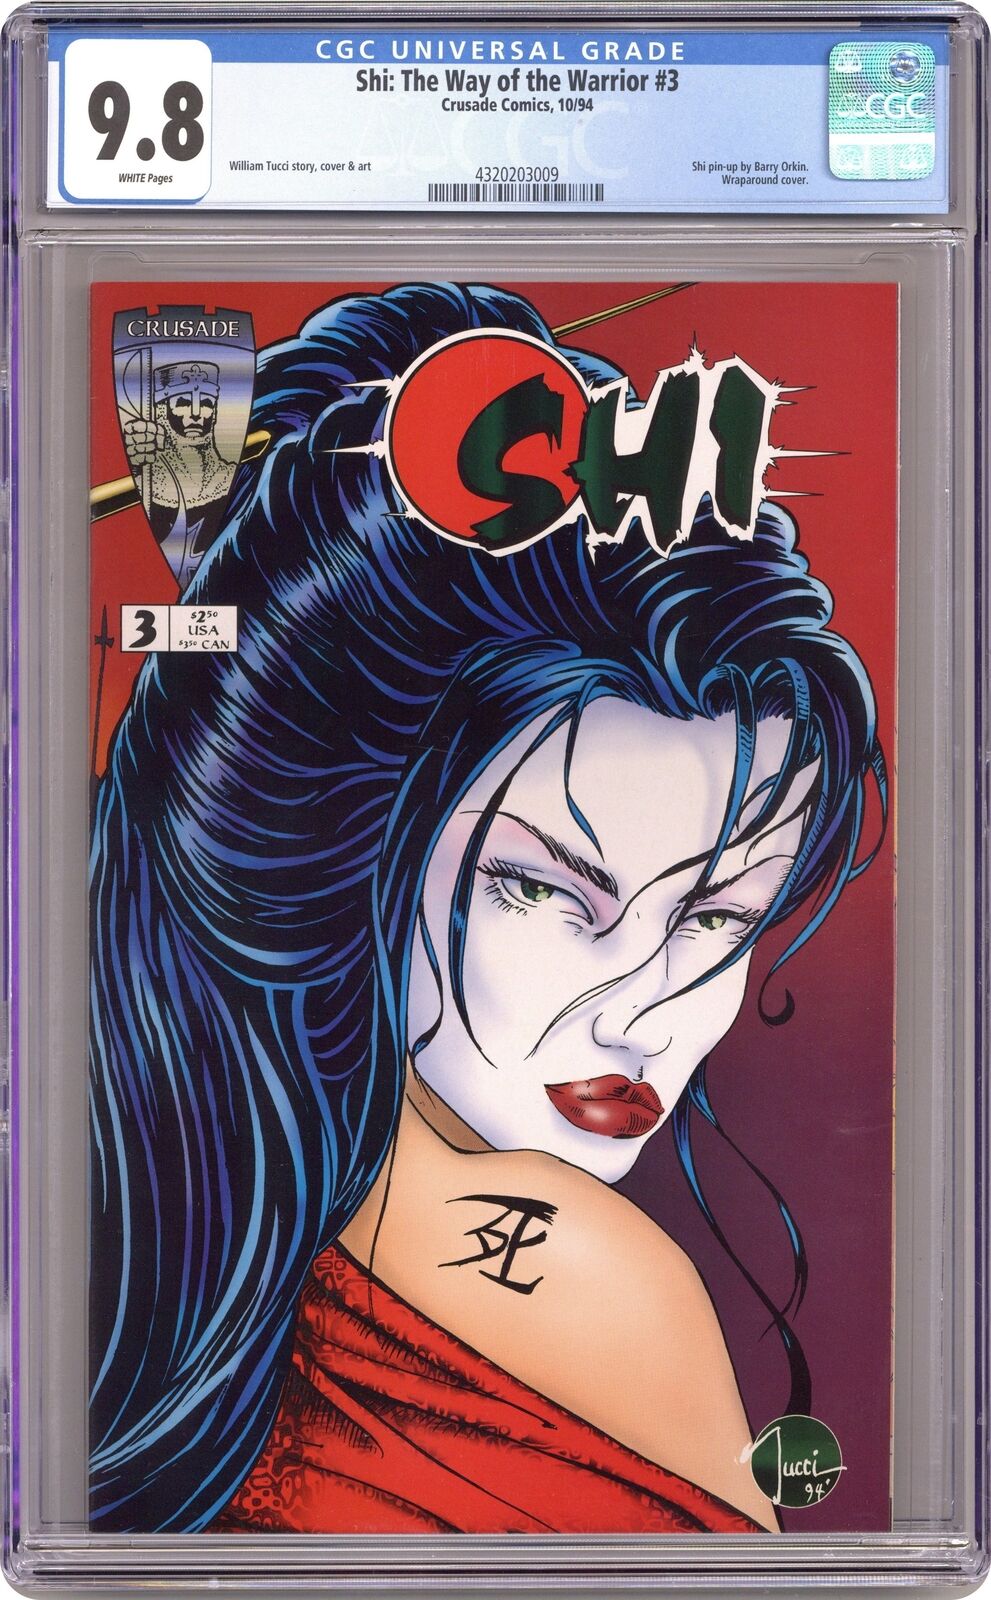 Shi The Way of the Warrior #3 CGC 9.8 1994 4320203009